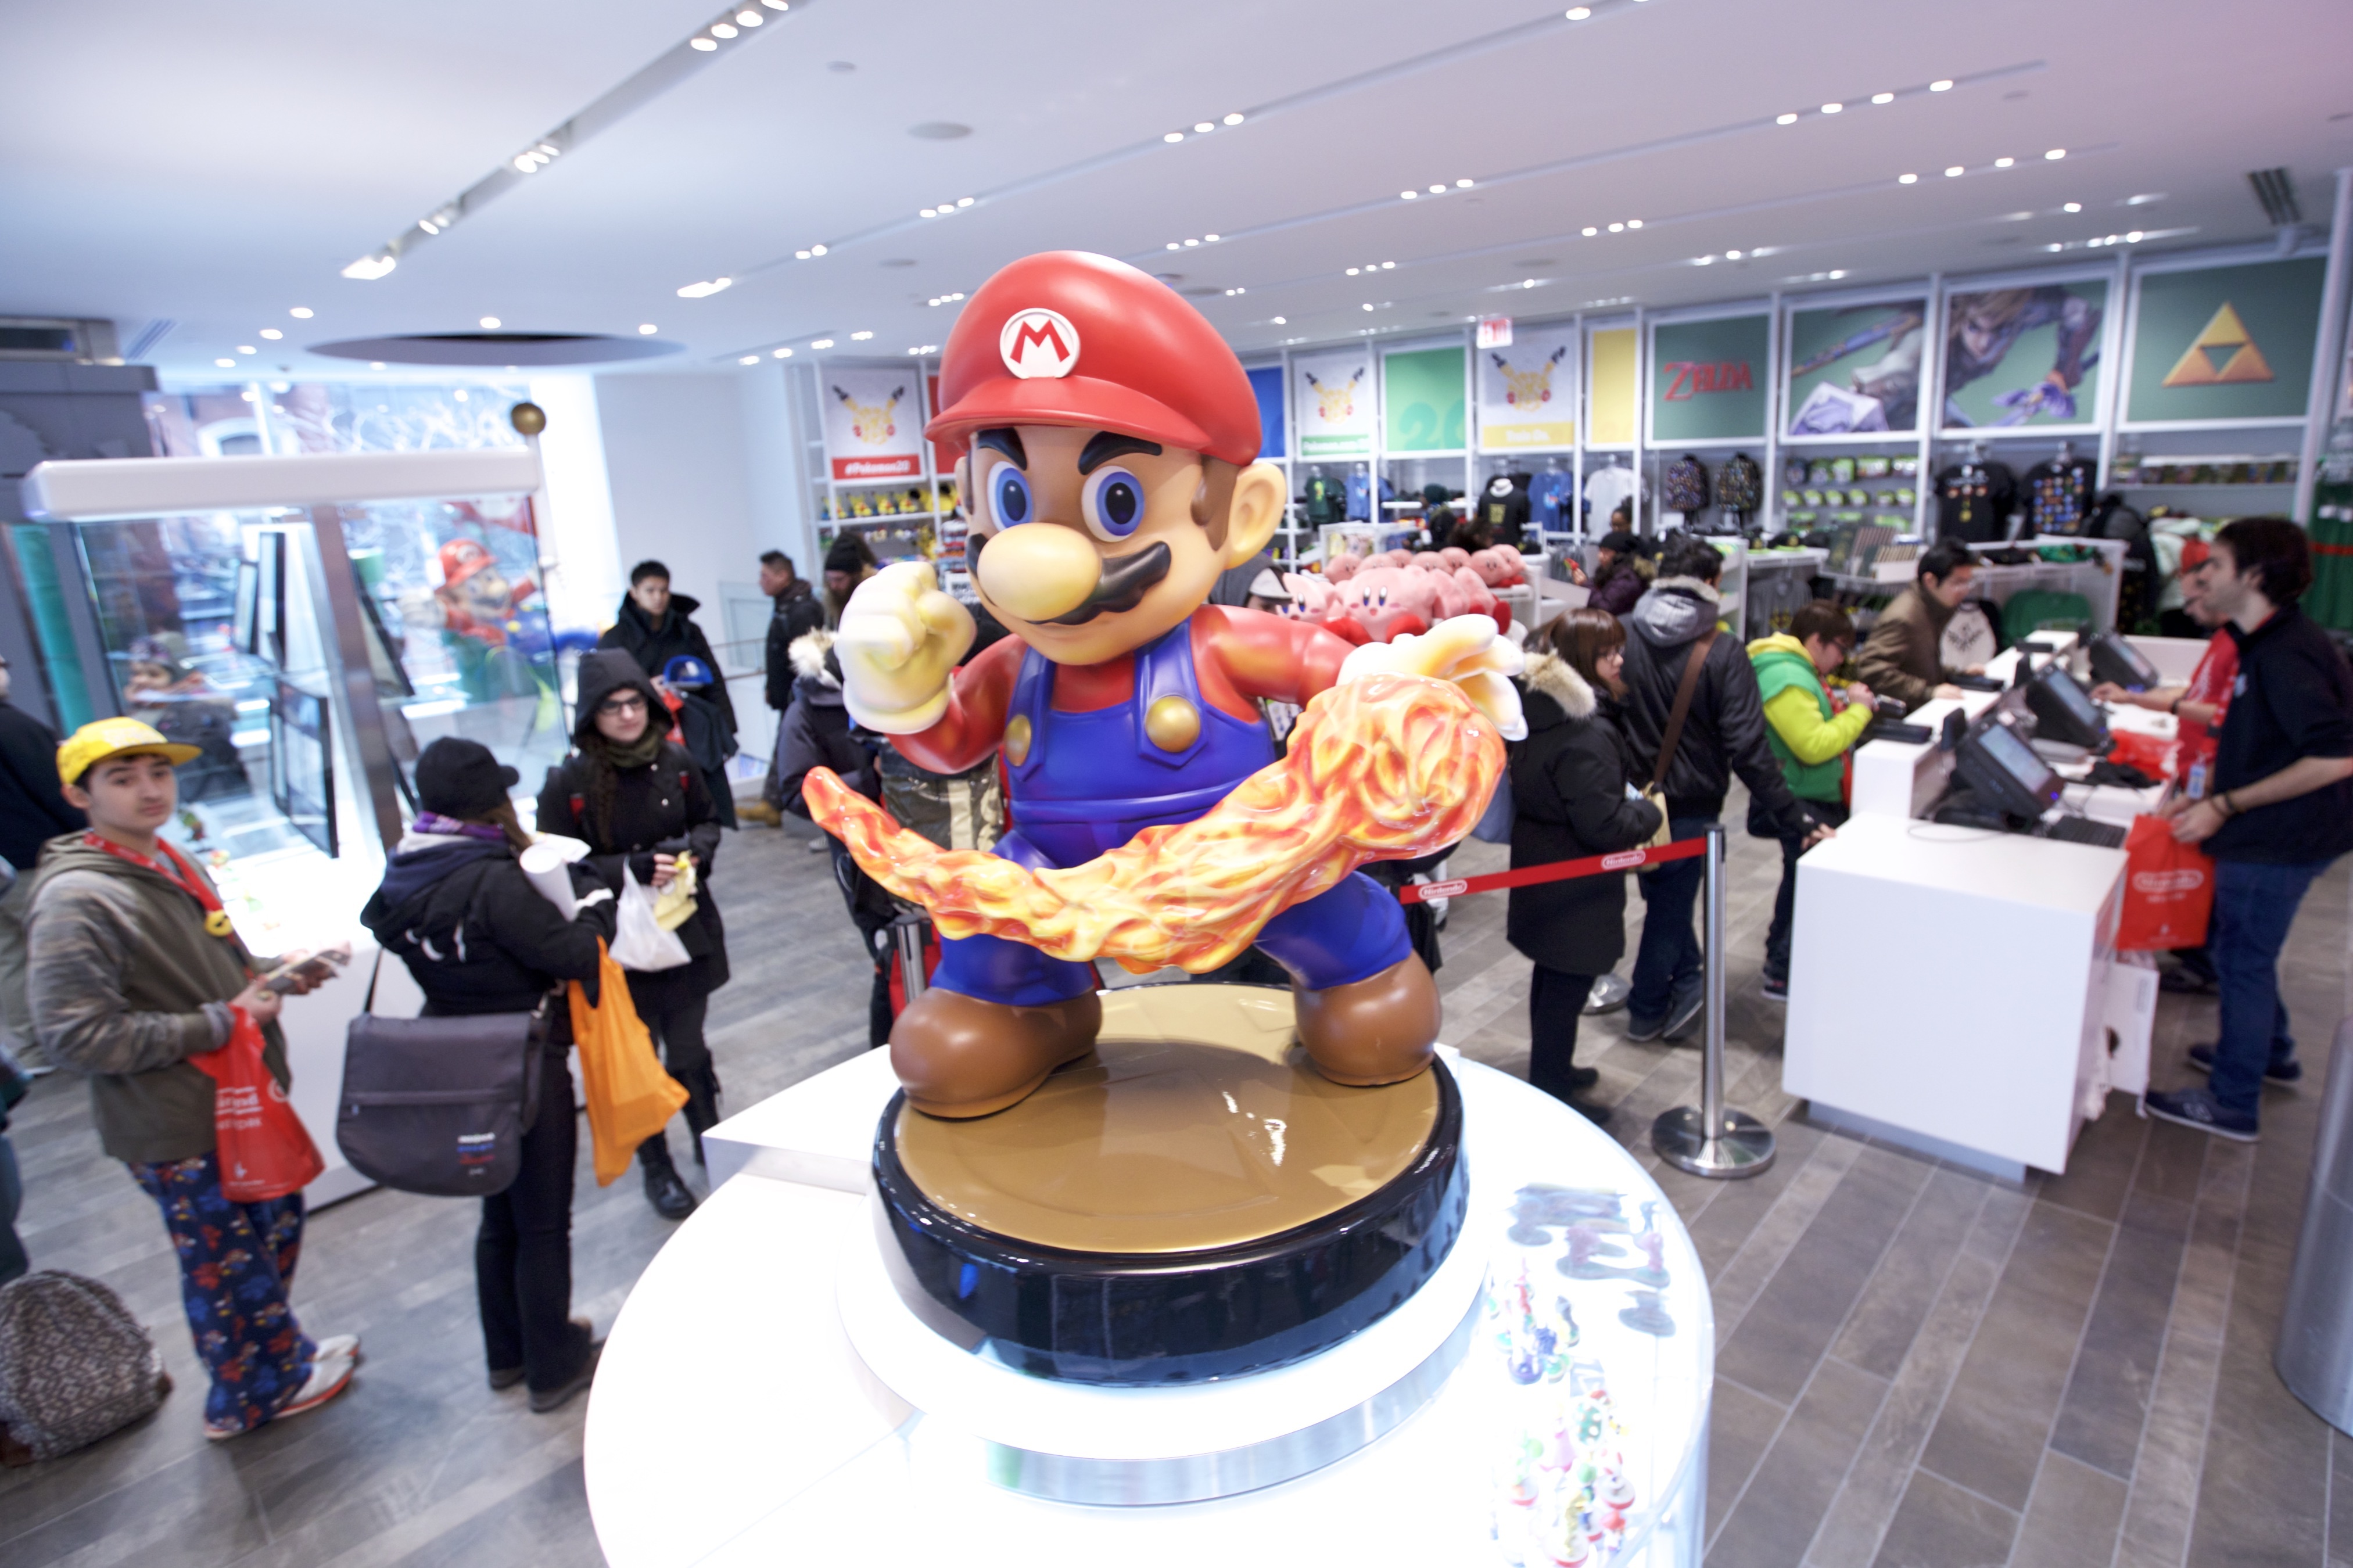 PHOTOS: Nintendo's New Superstore Creates A Ruckus In New York